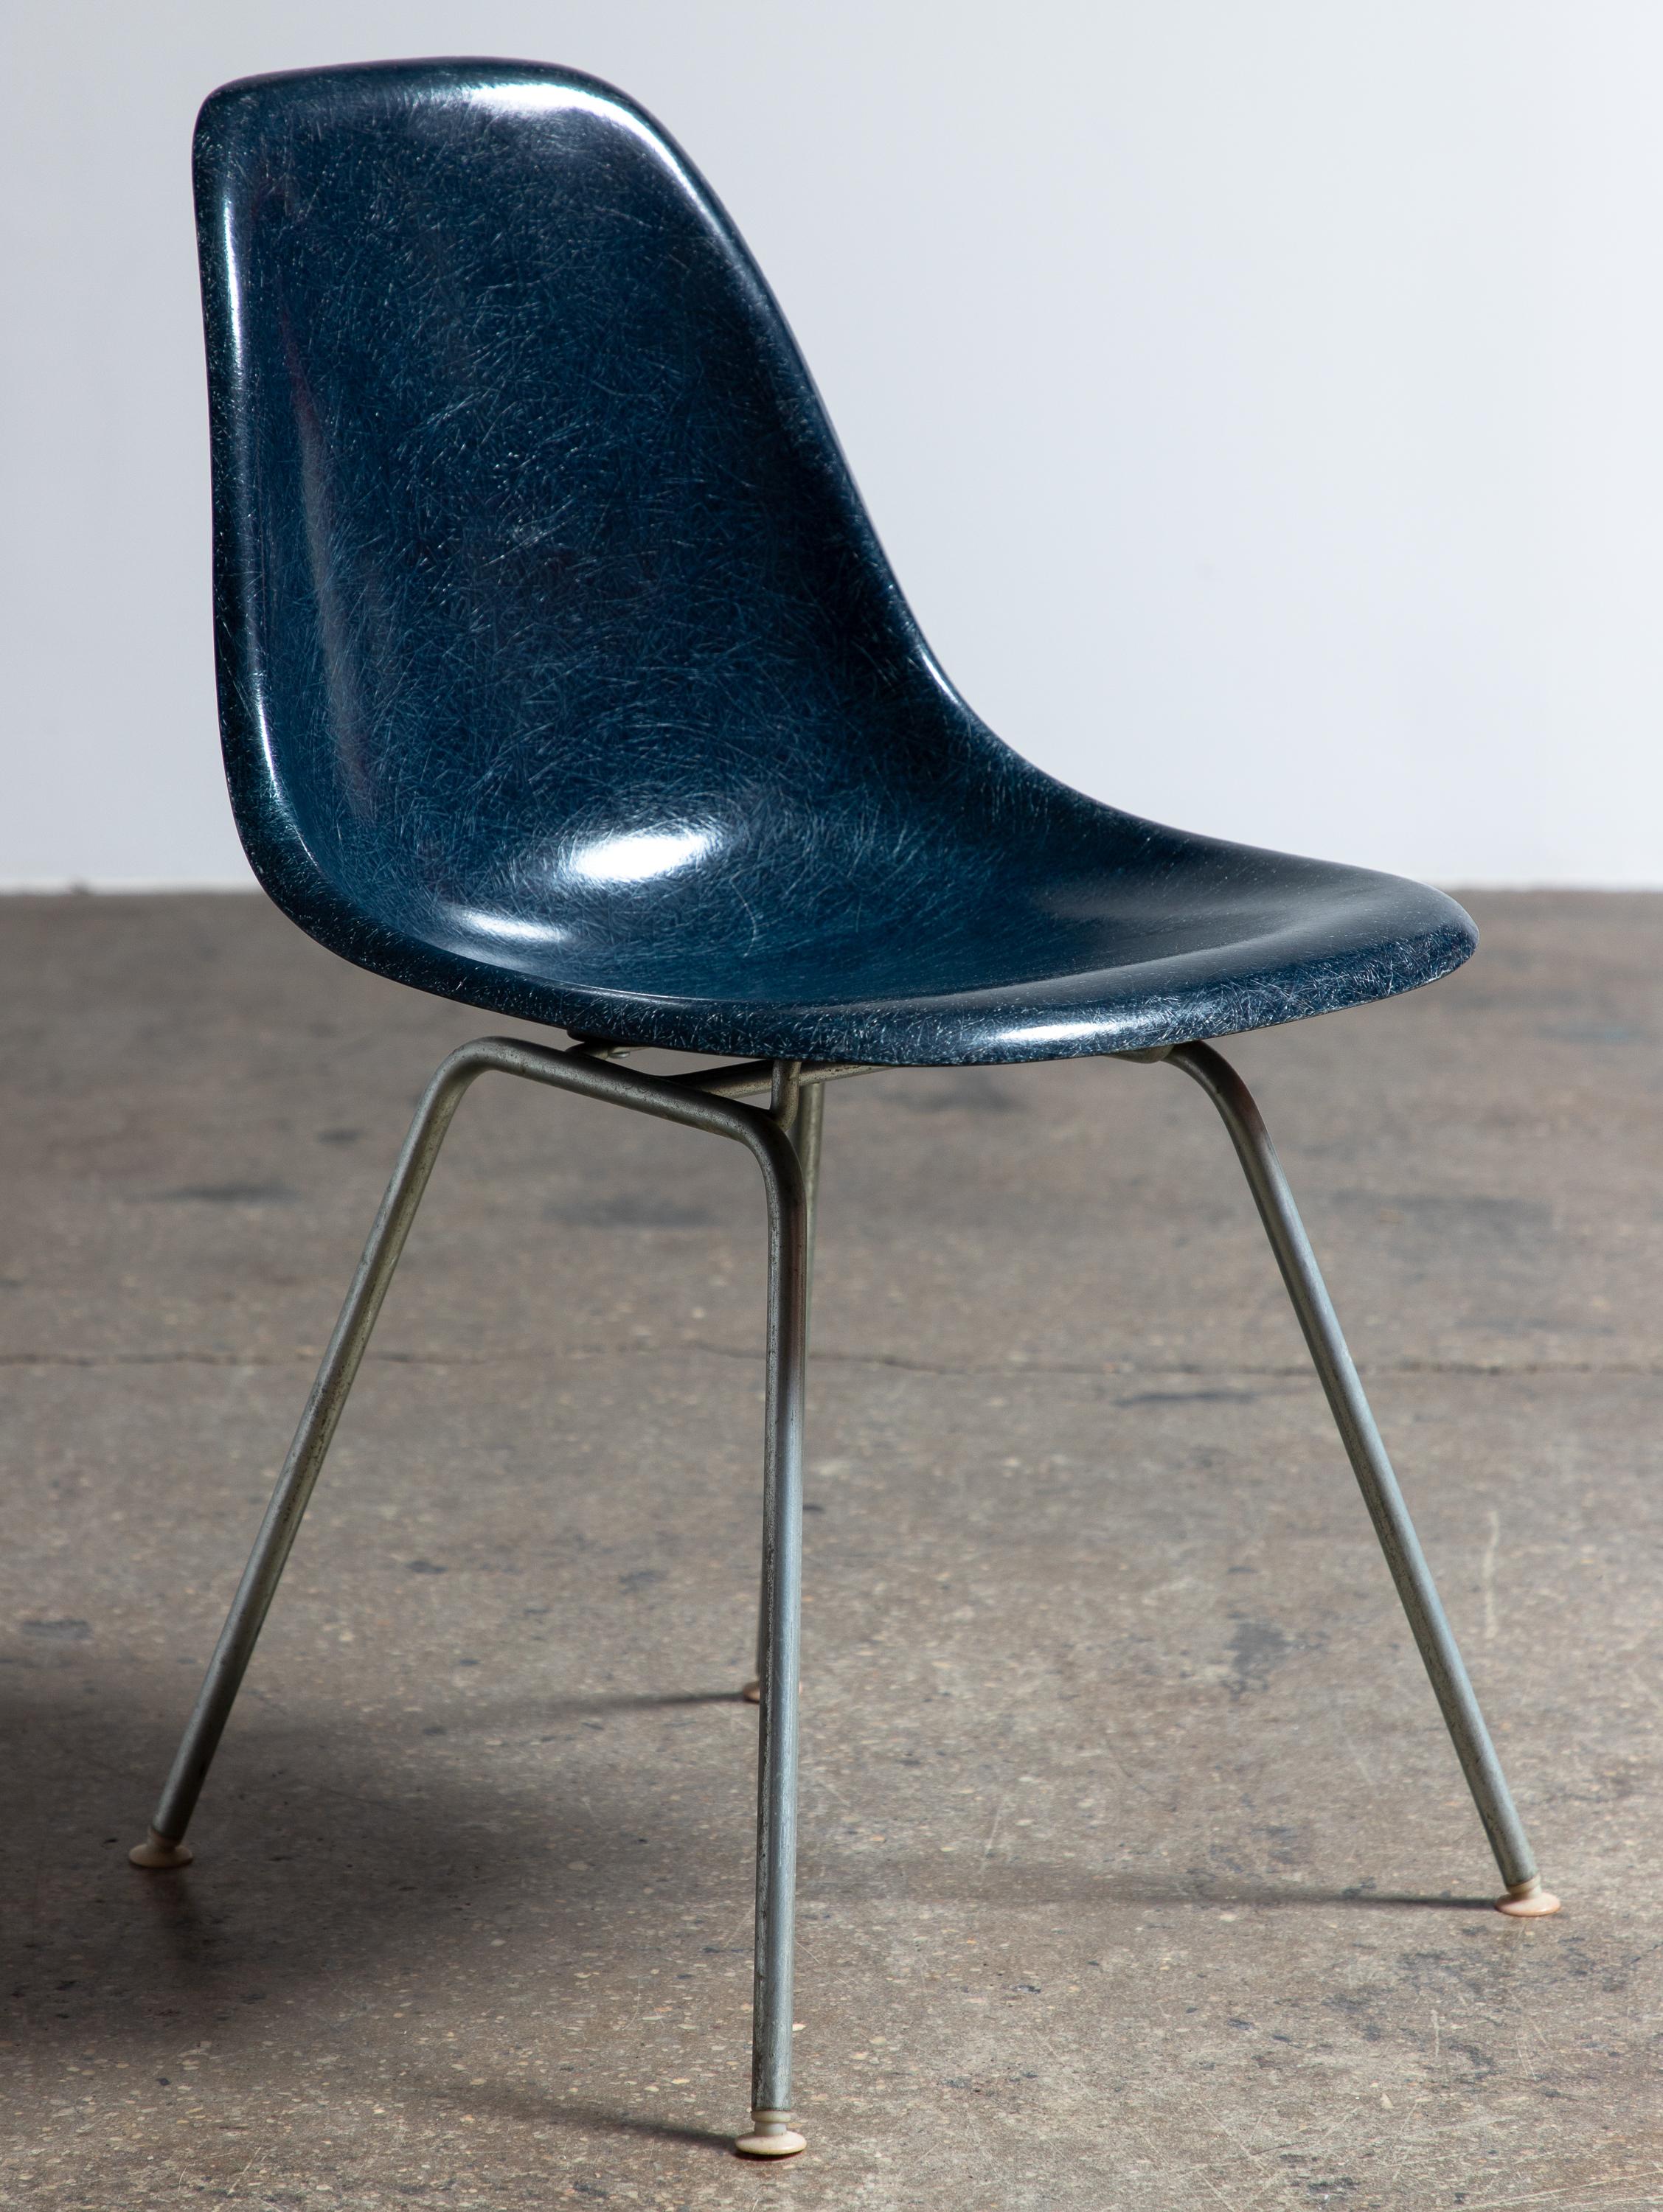 Original Molded Fiberglass Shell Chair, designed by Charles and Ray Eames for Herman Miller. Vintage shell chairs are prized for their attractive patina, distinct thread texture and beautiful depth of color seen in the fiberglass material. Shell is